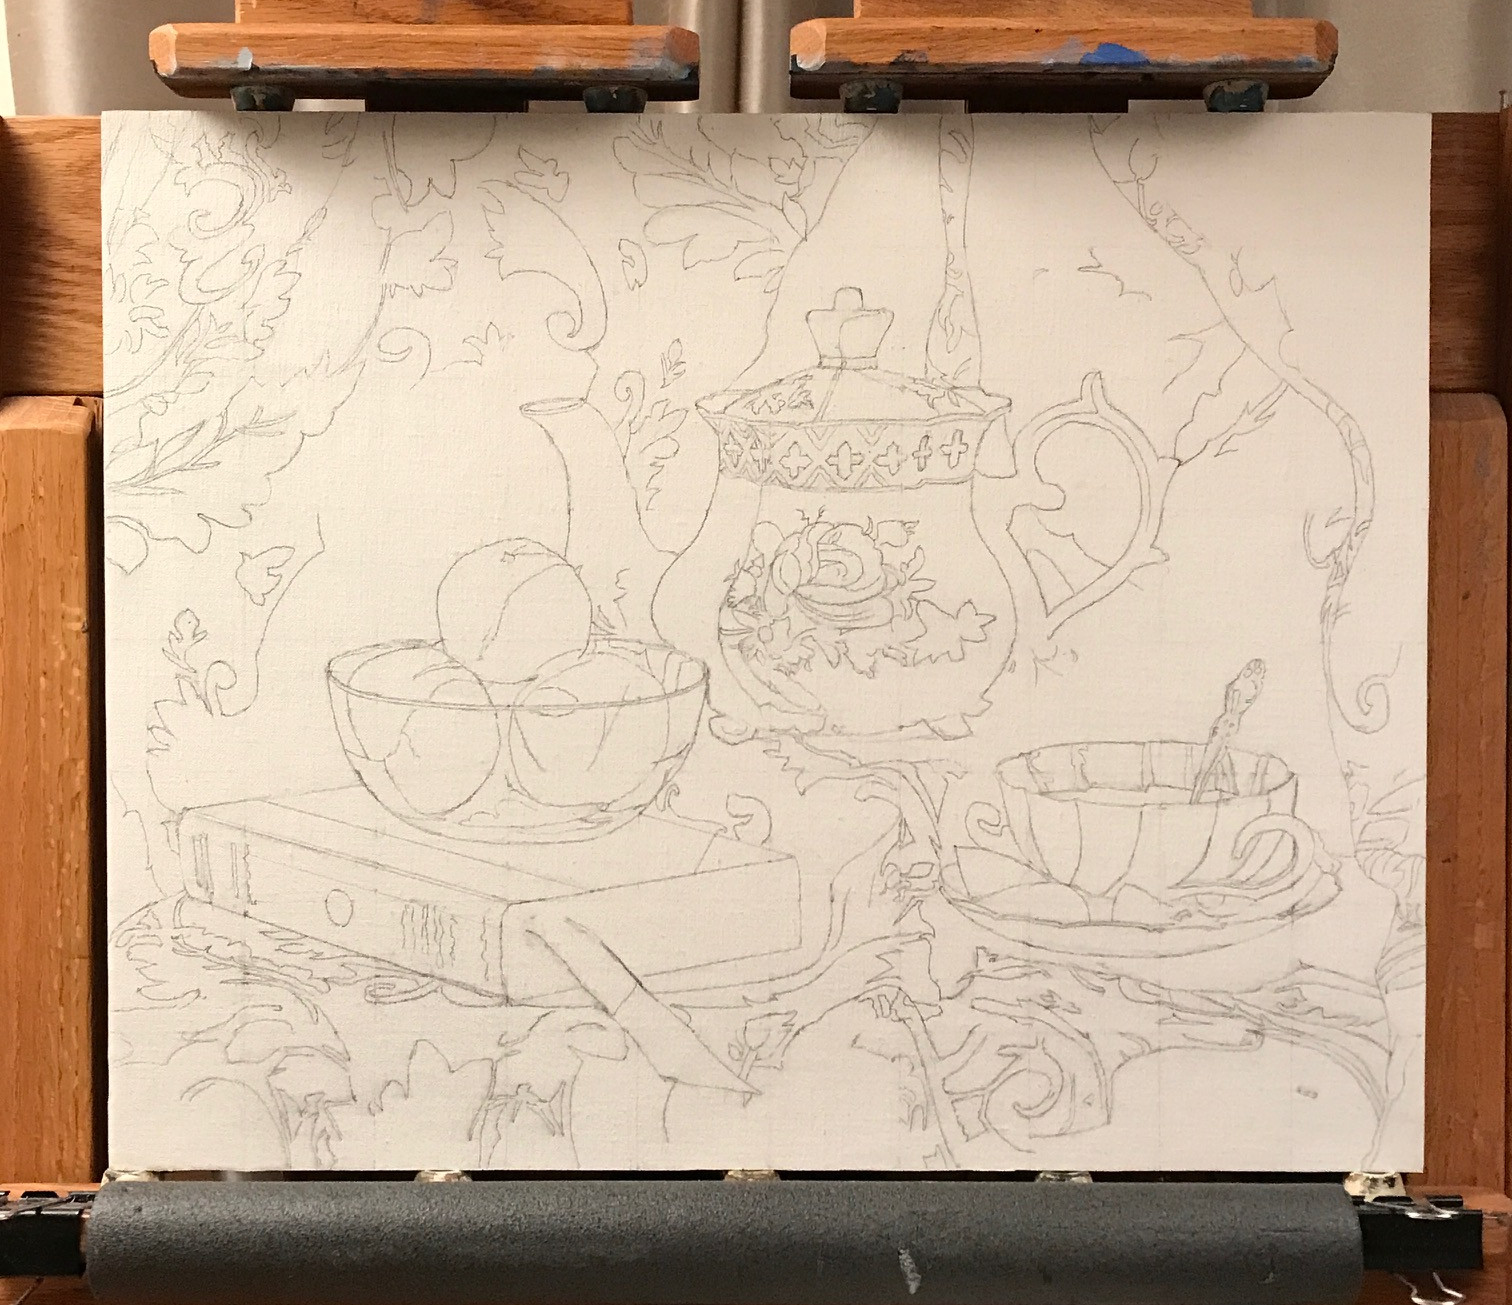 The drawing for a larger painting in progress.